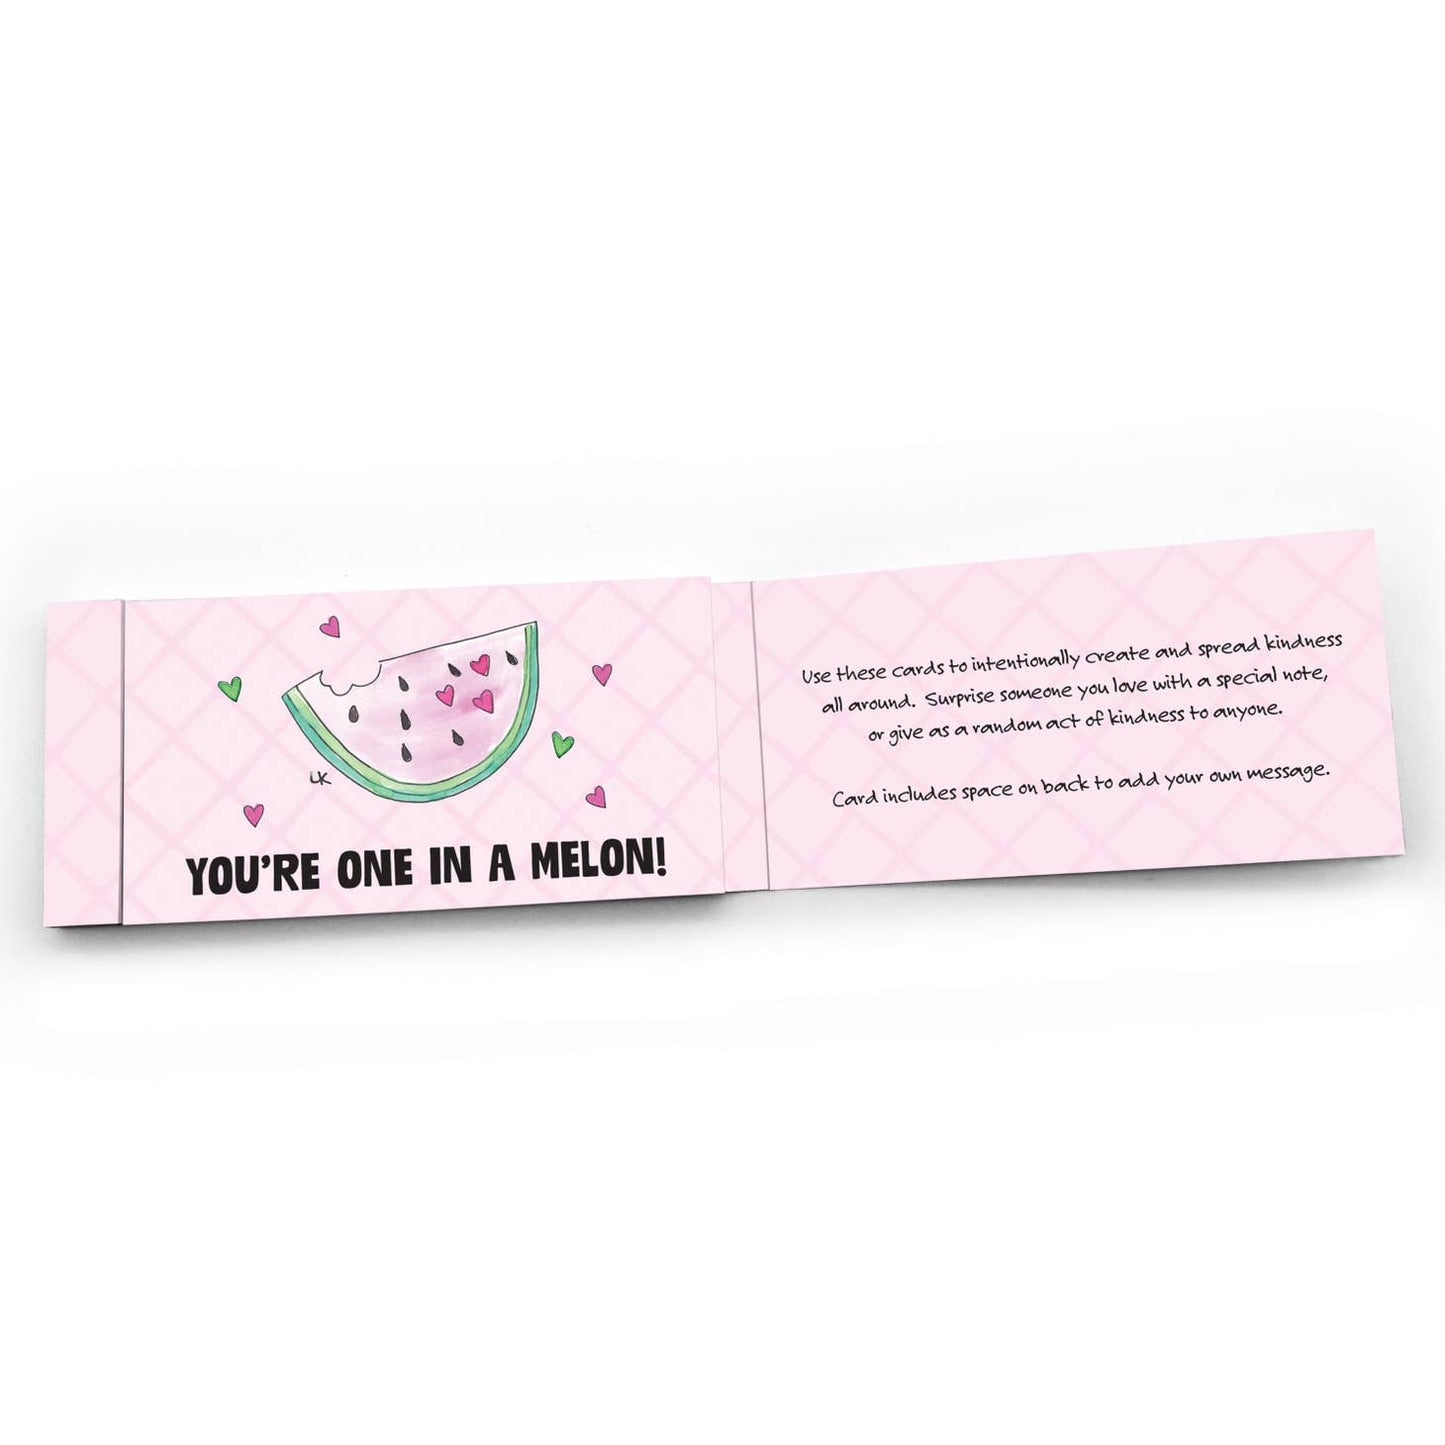 Sprinkle Kindness Tear & Share Lunch Notes for spreading positivity and love - Favorite Little Things